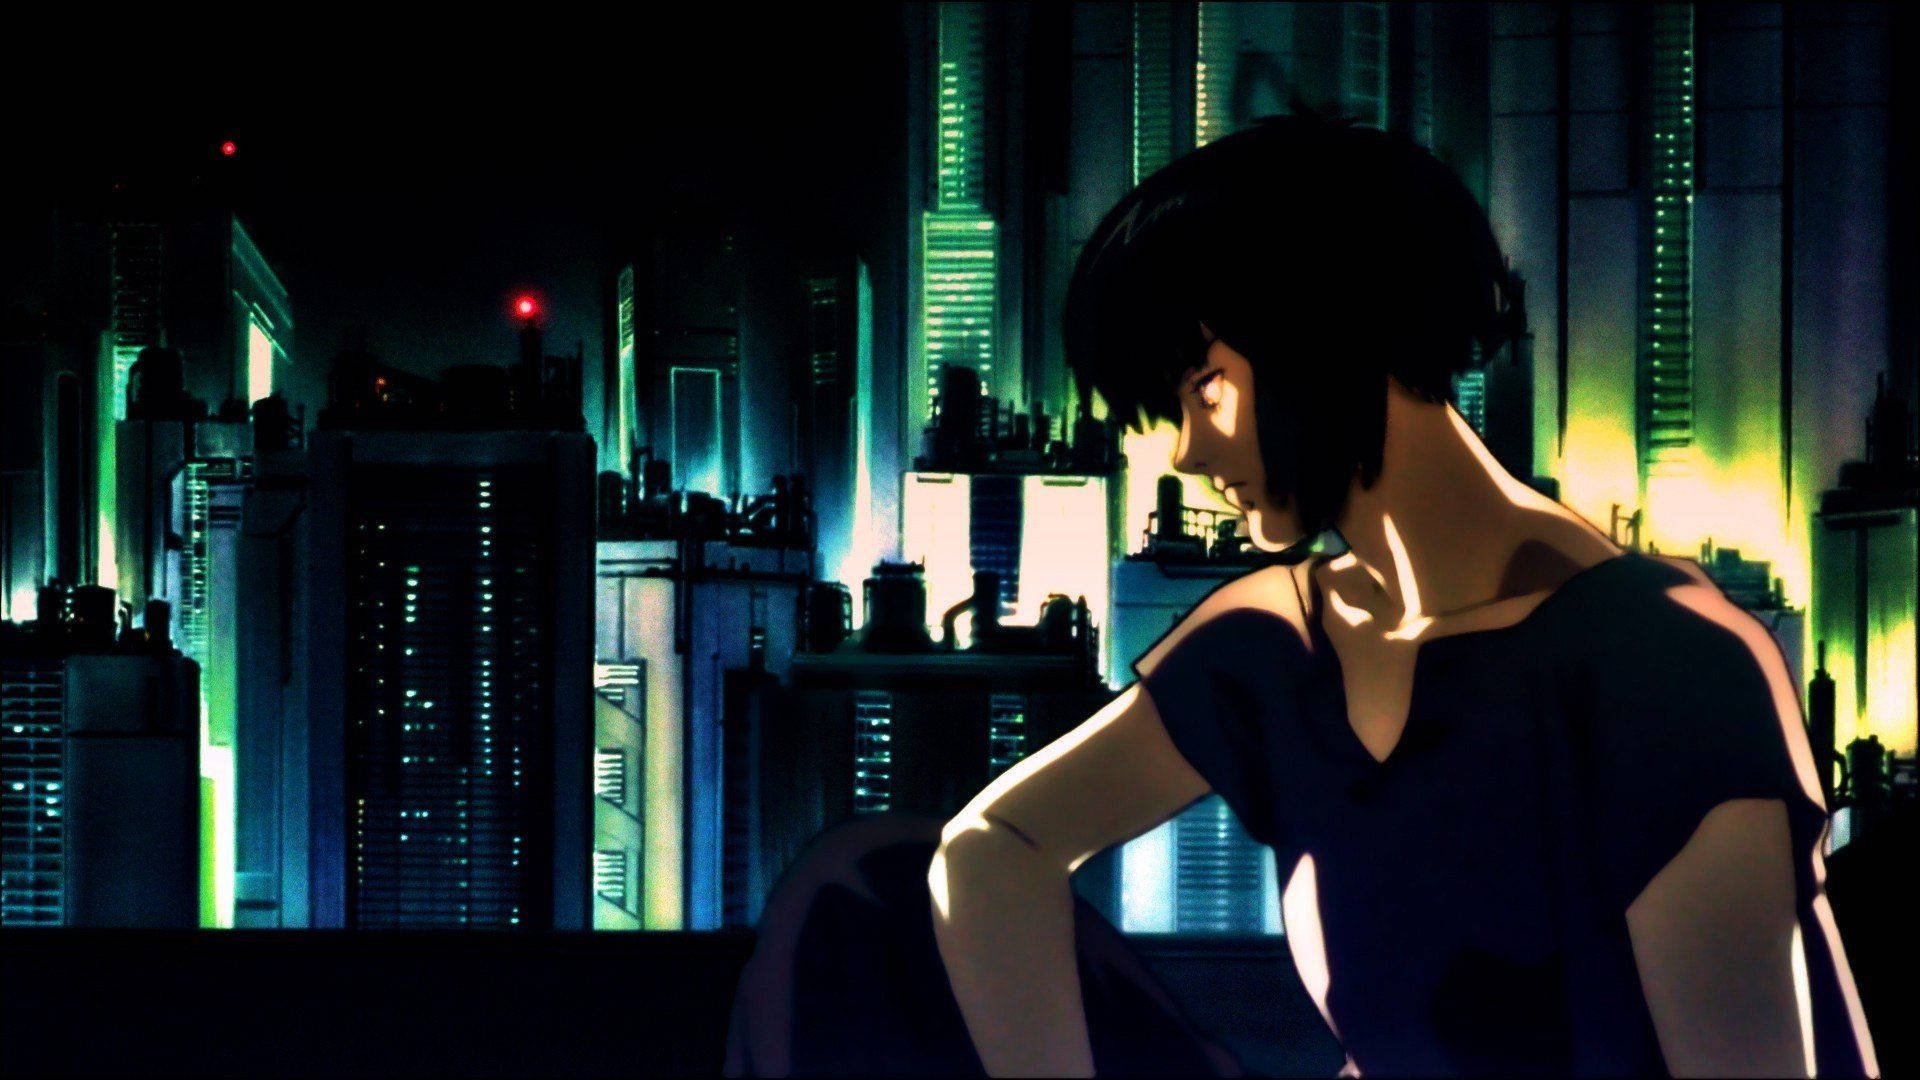 Kusanagi Ghost In The Shell Anime Background